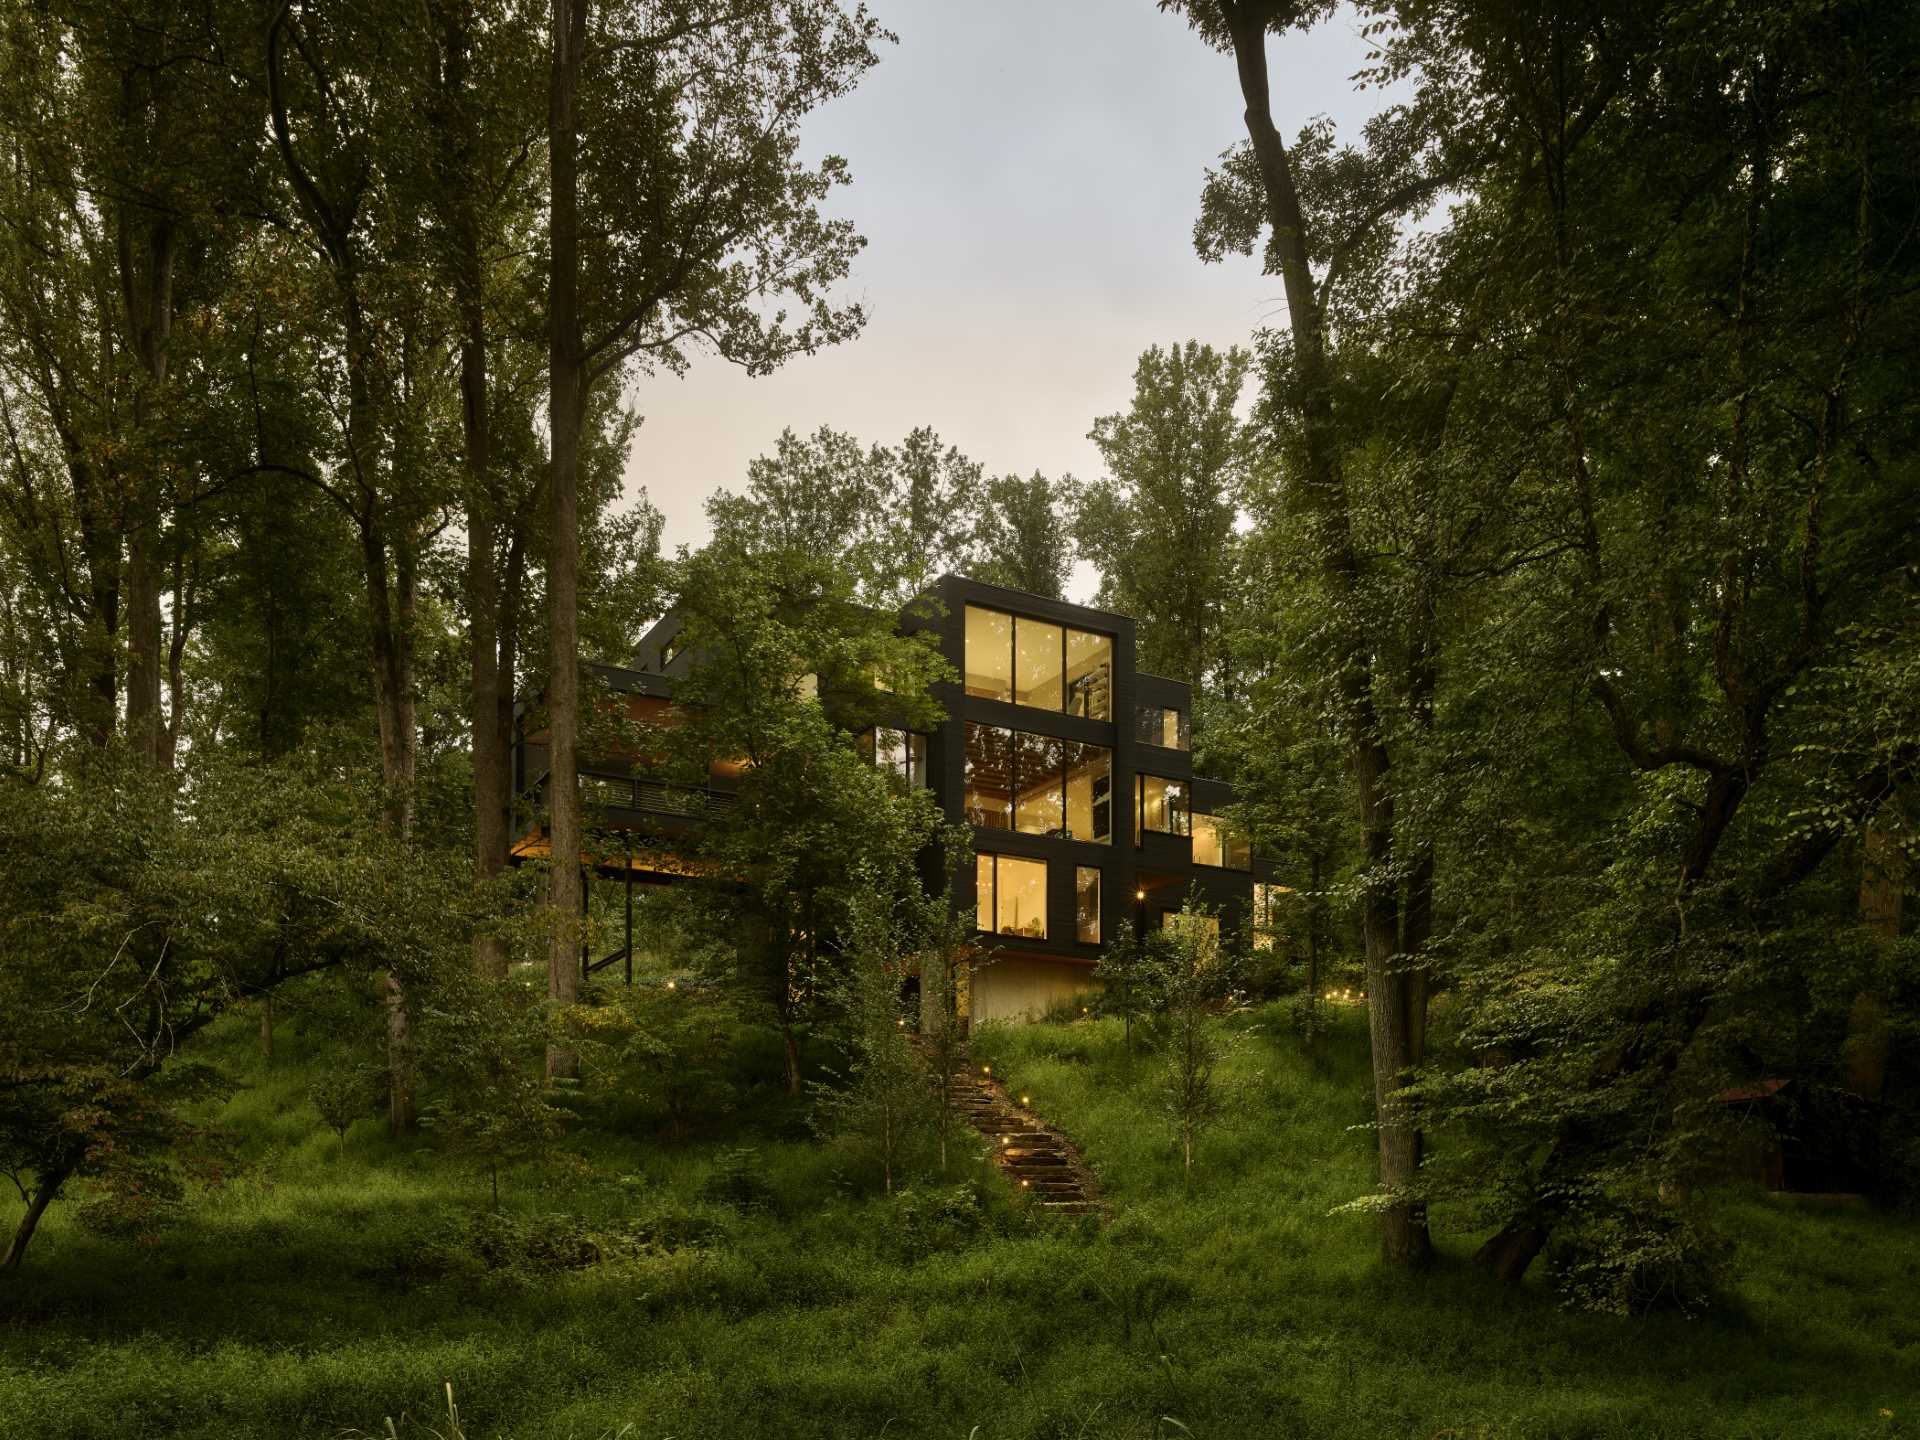 A modern home with an abundance of windows, is also surrounded by forest.